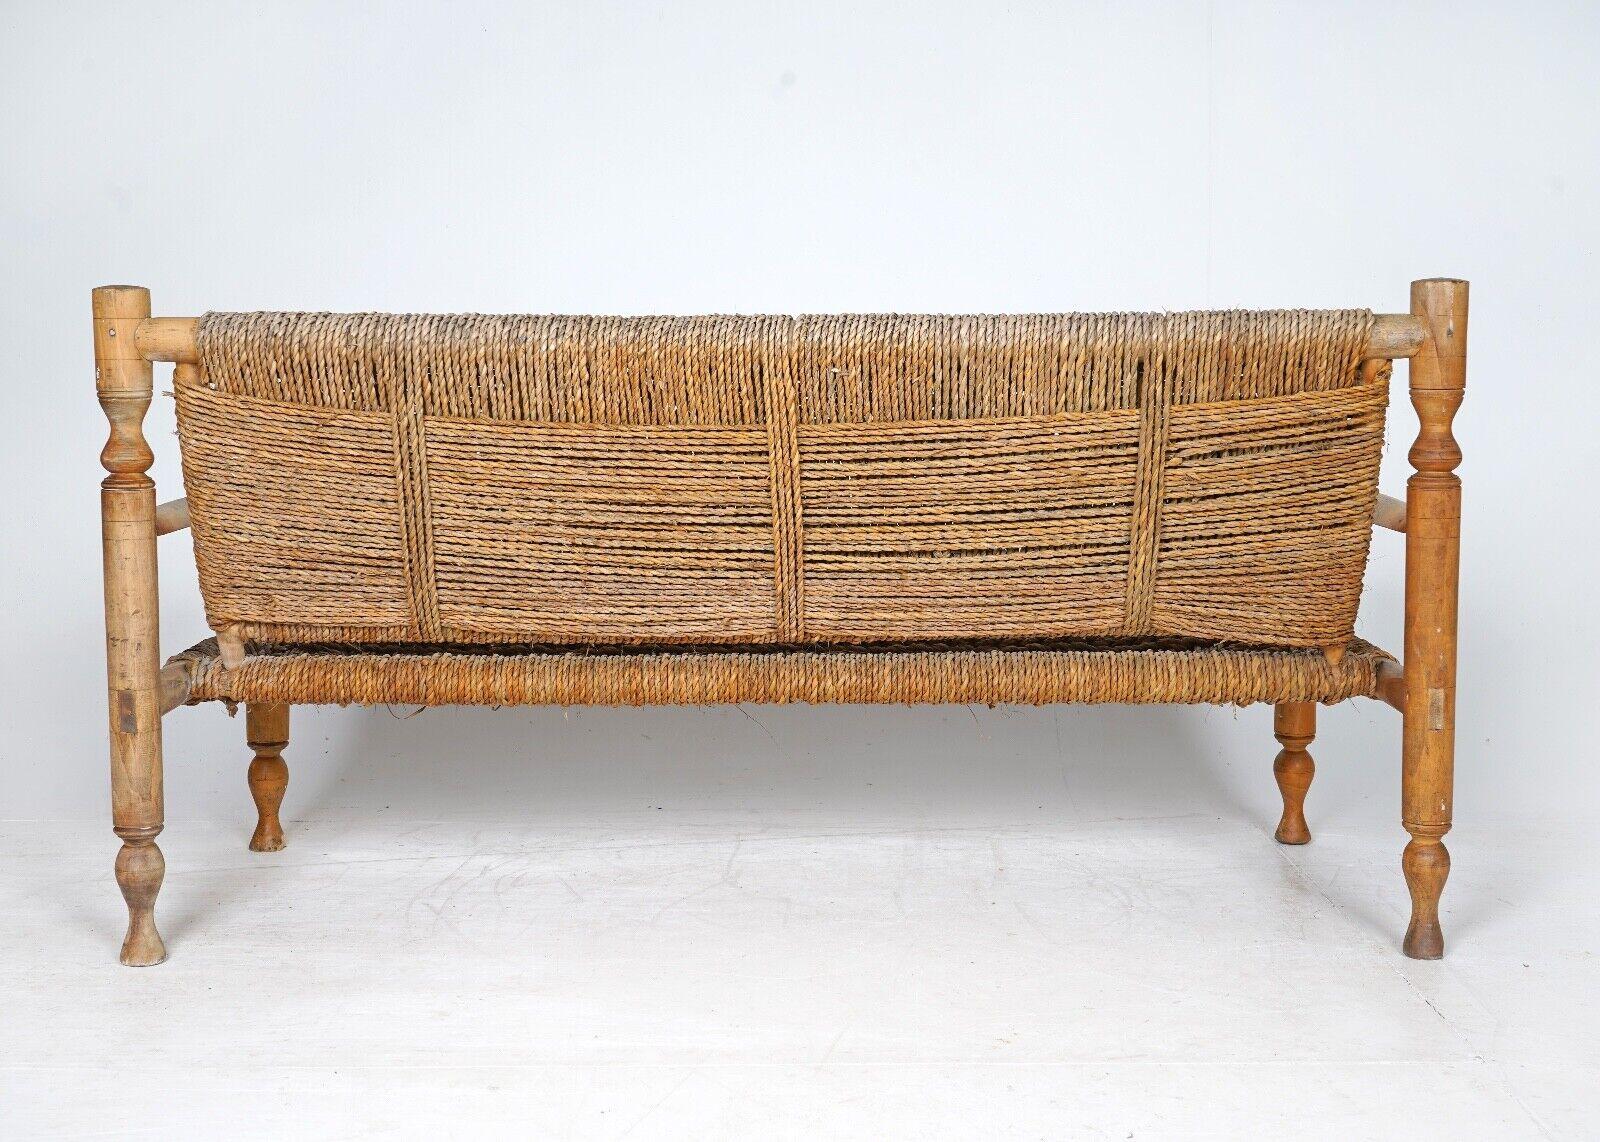 1950's French Bench by Adrien Audoux and Frida Minnet - Hemp Rope Seat  10